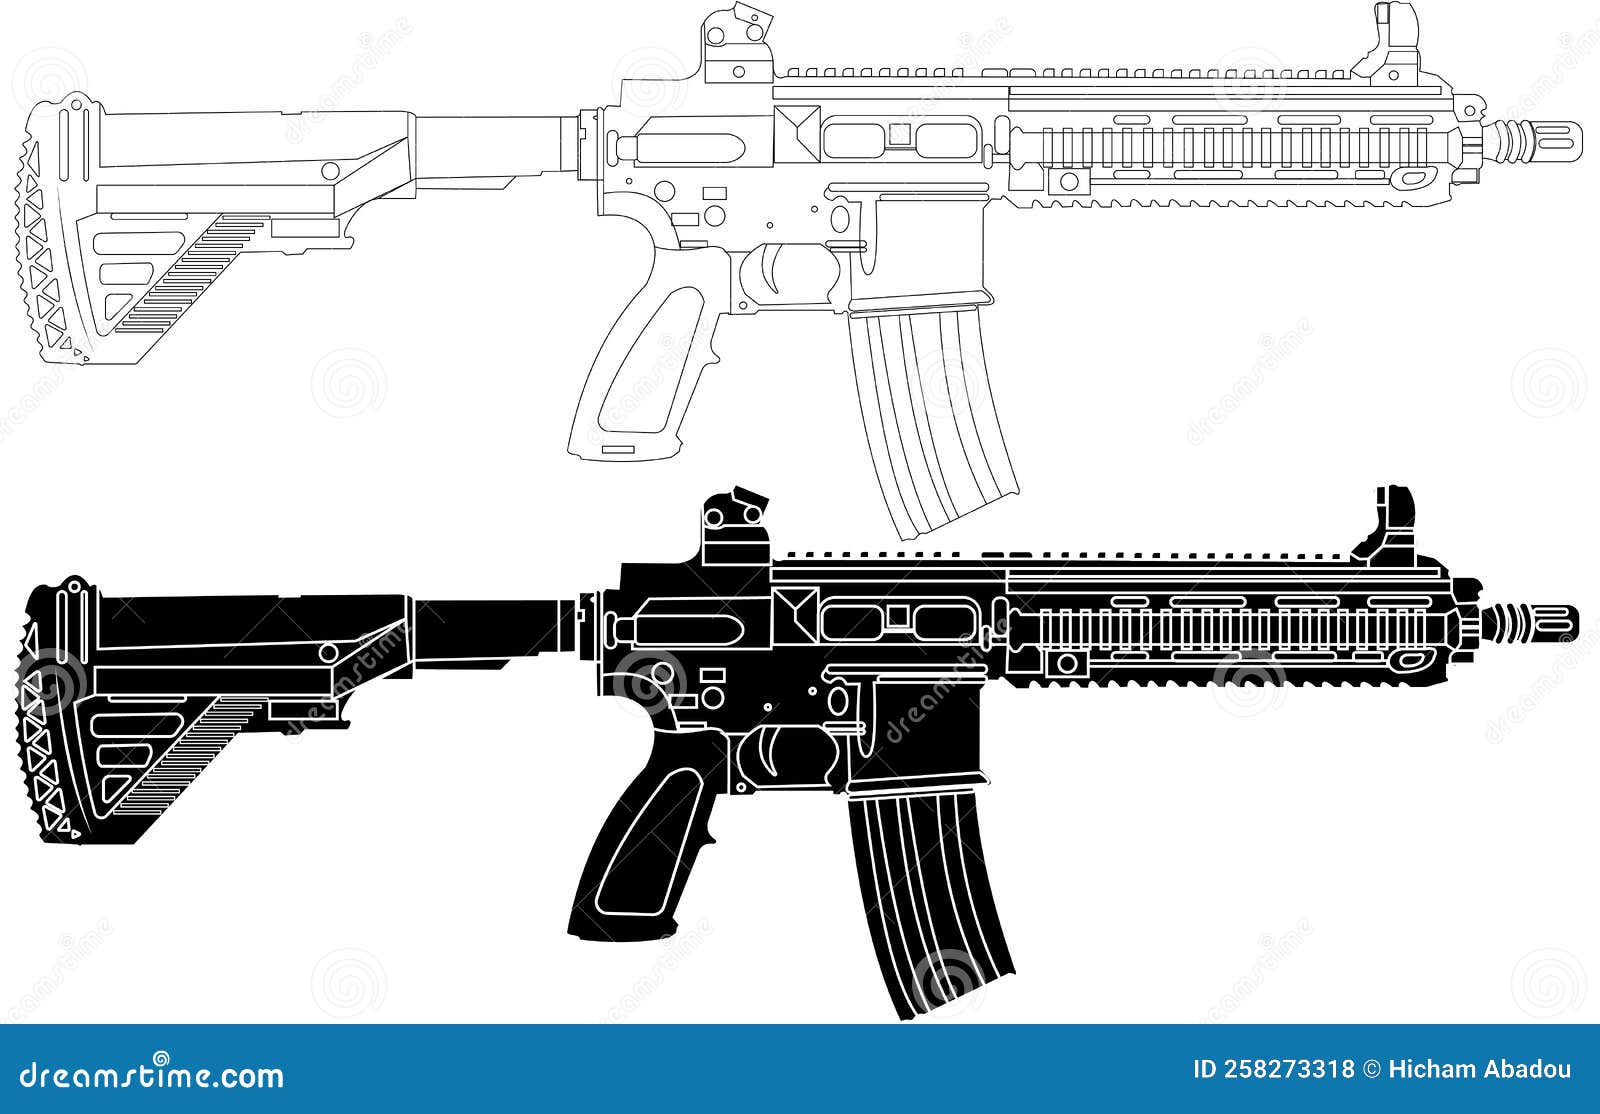 hk416 is a gas-operated assault rifle chambered for the 5.56Ãâ45mm nato cartridge.